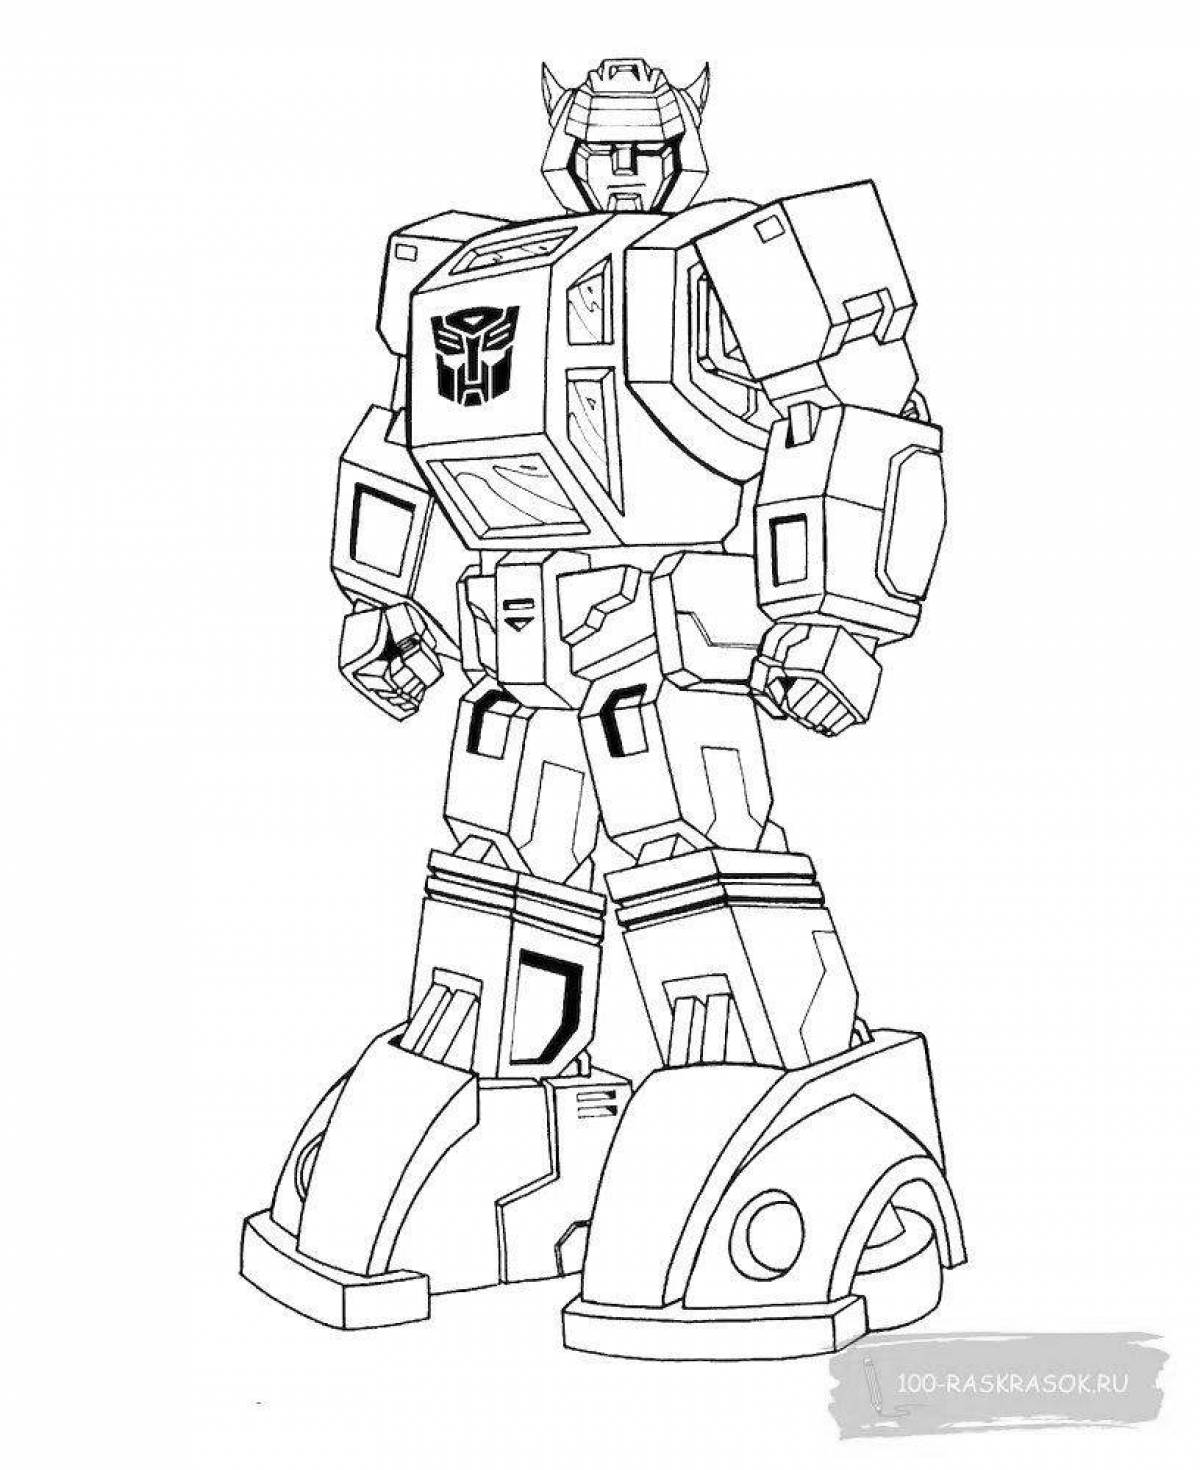 Charming transformers coloring book for kids 6-7 years old